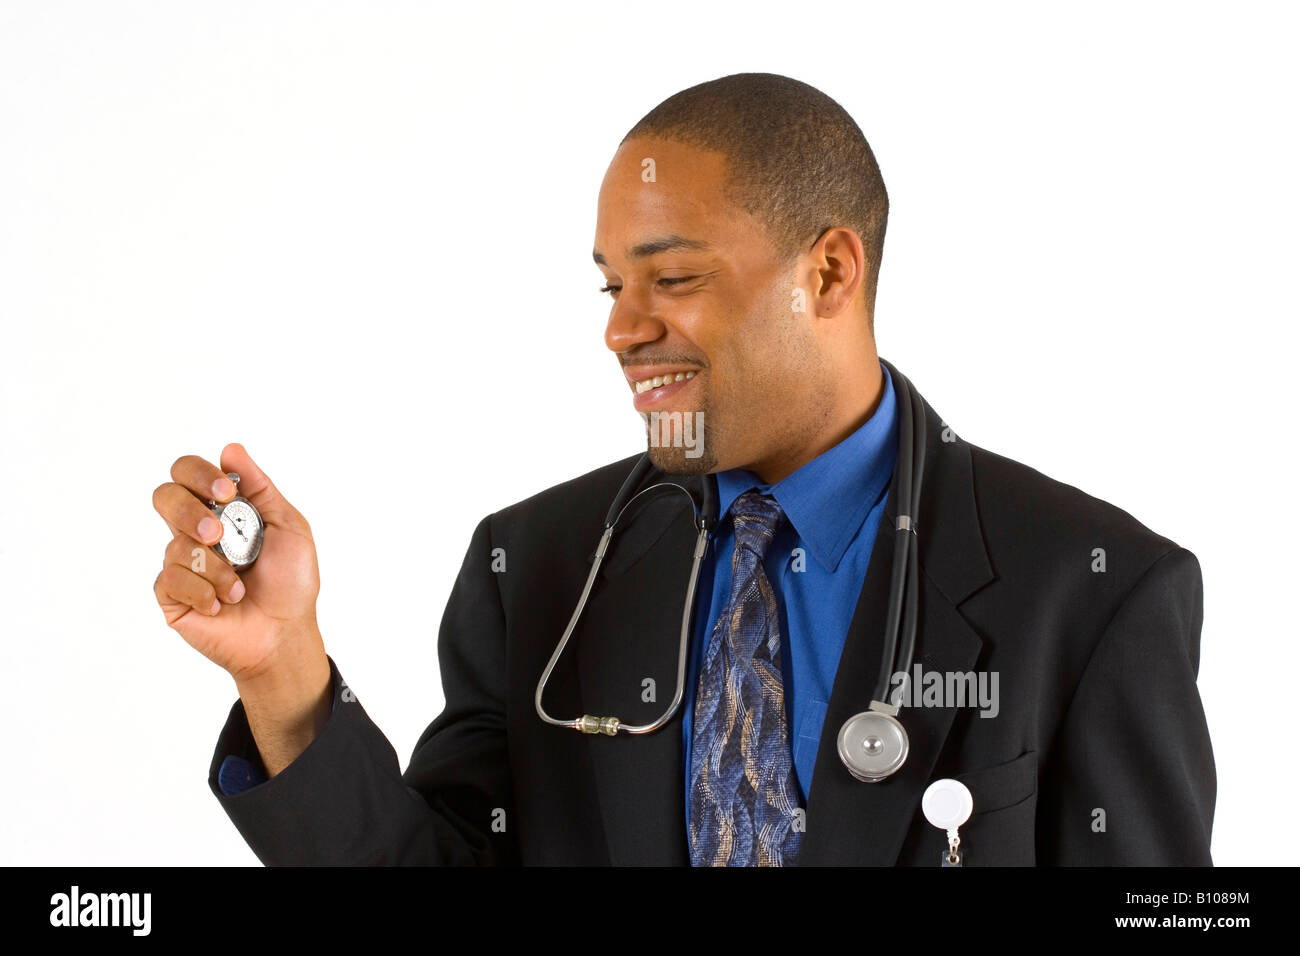 Its time to check your health. Dr holds a stopwatch. Stock Photo